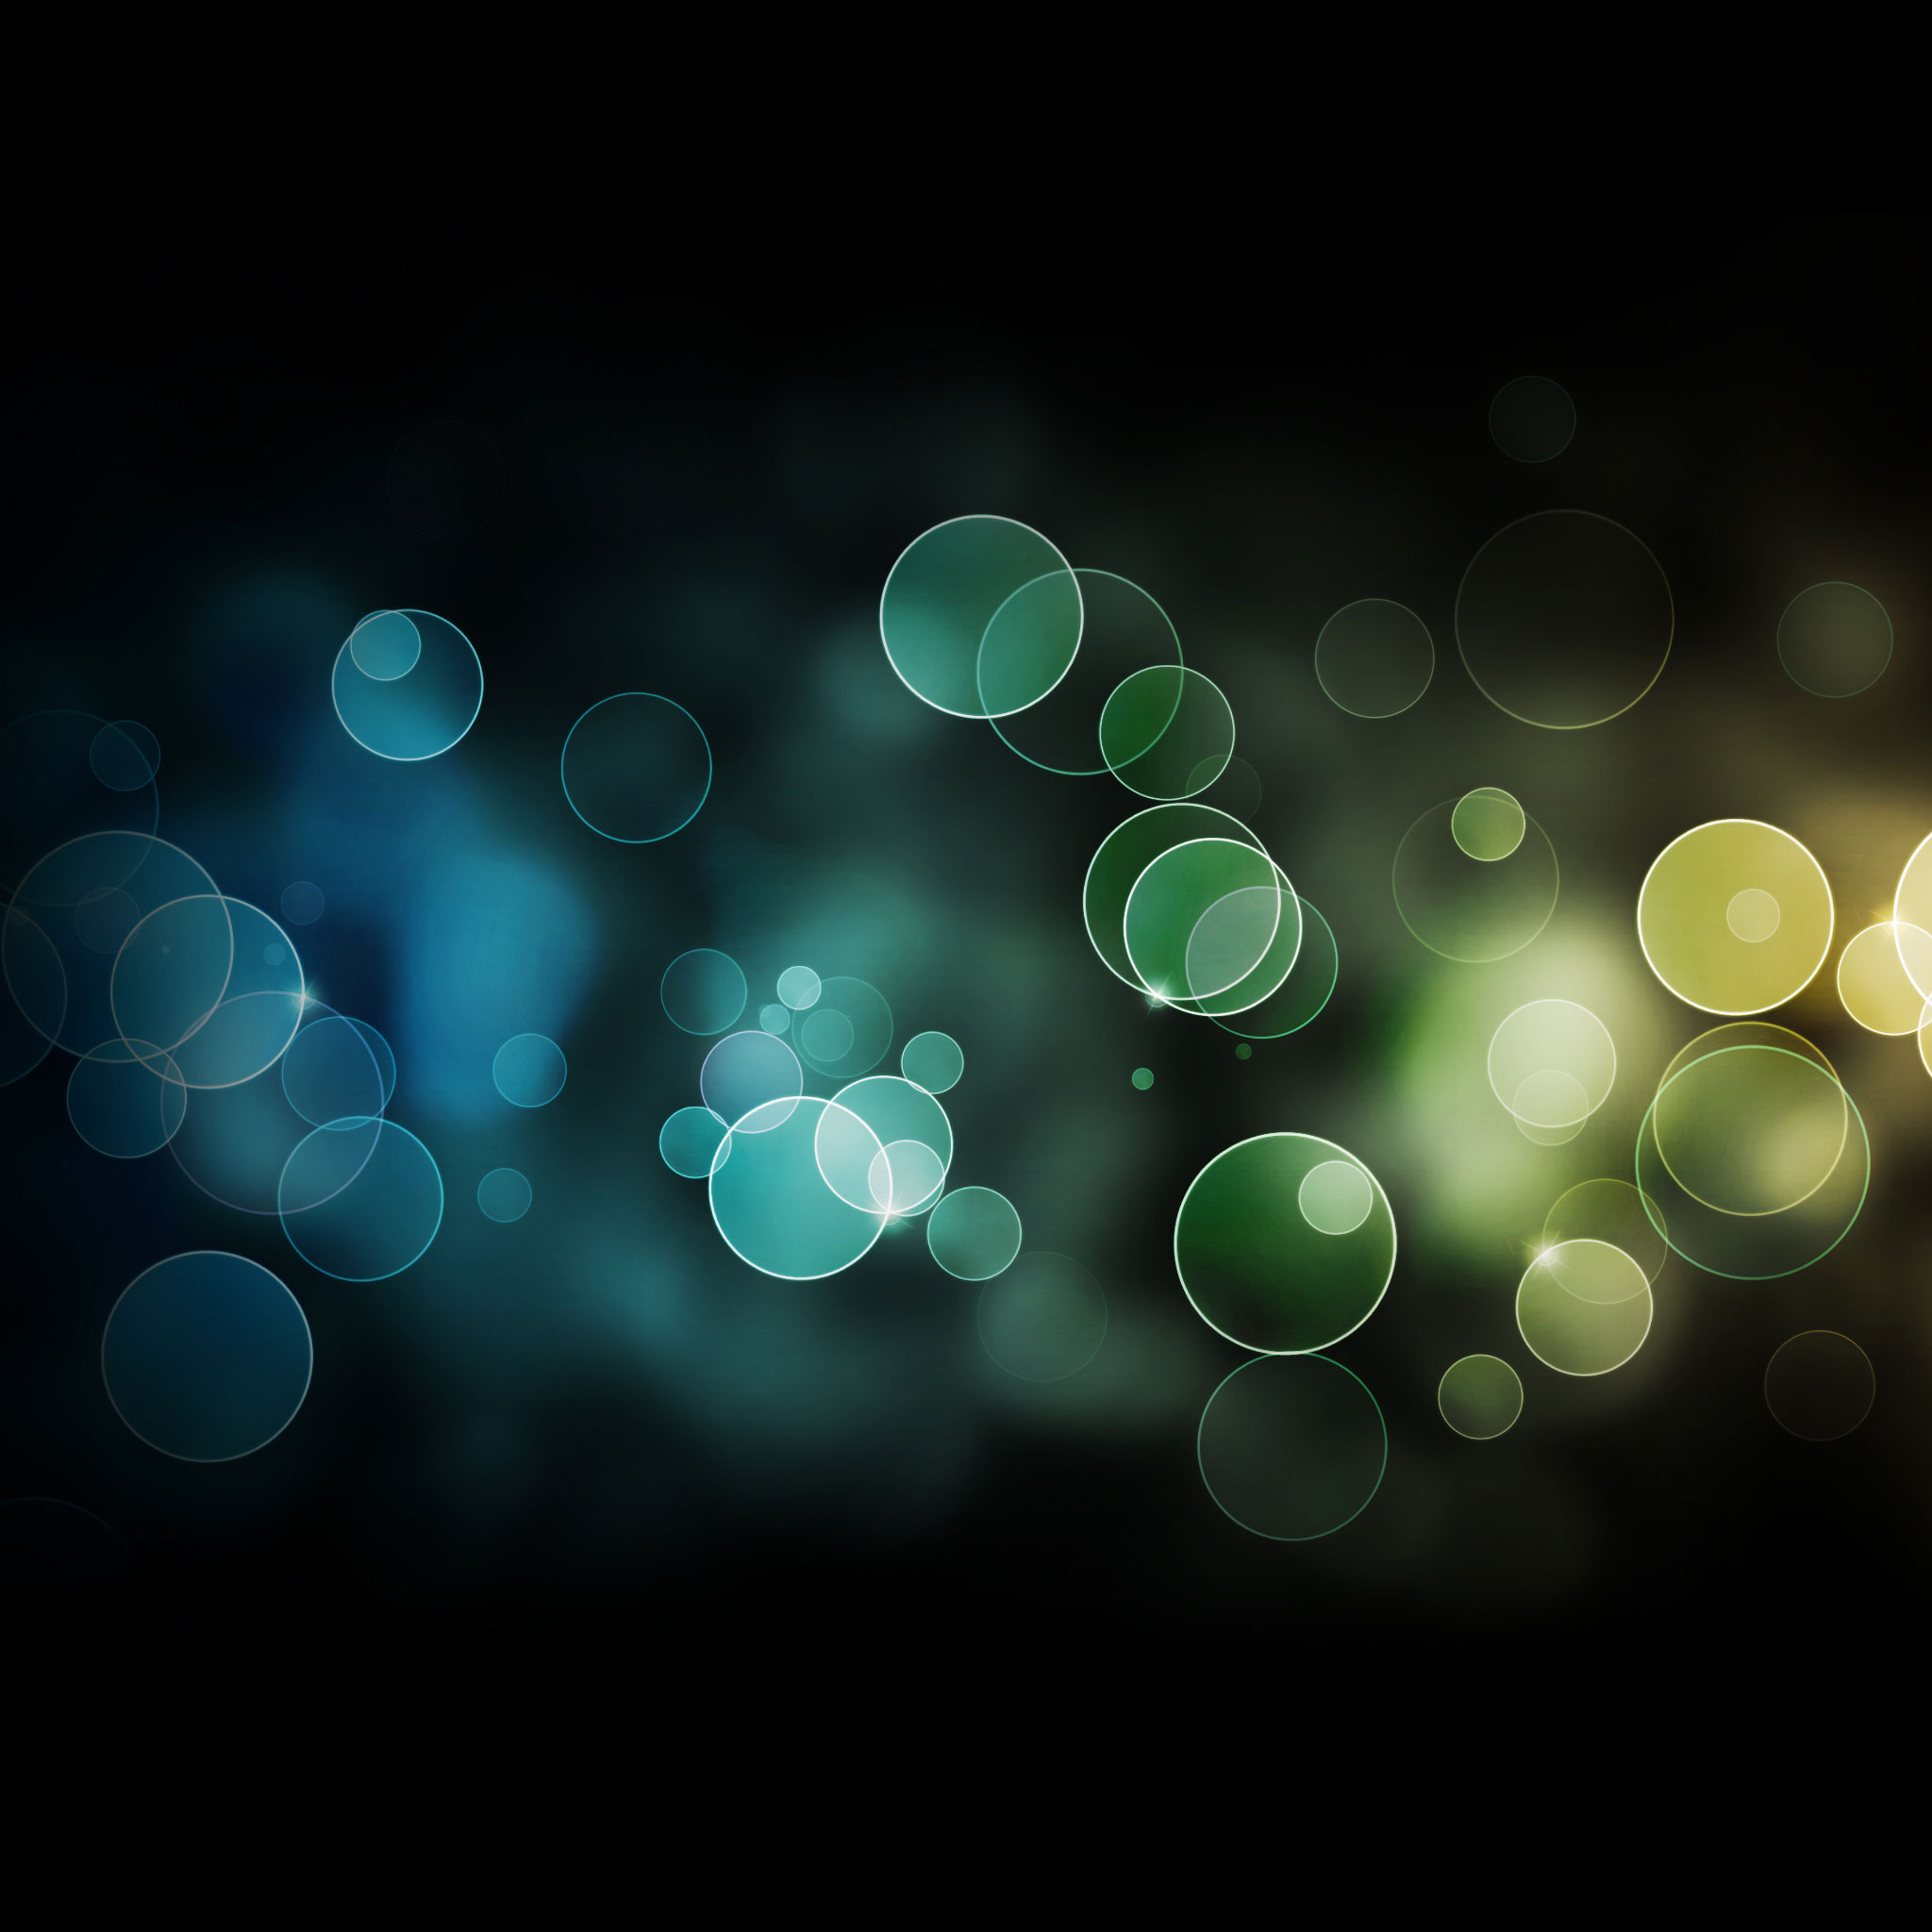 Abstract Bubbles Samsung Galaxy Tab 10 wallpapers | Tablet